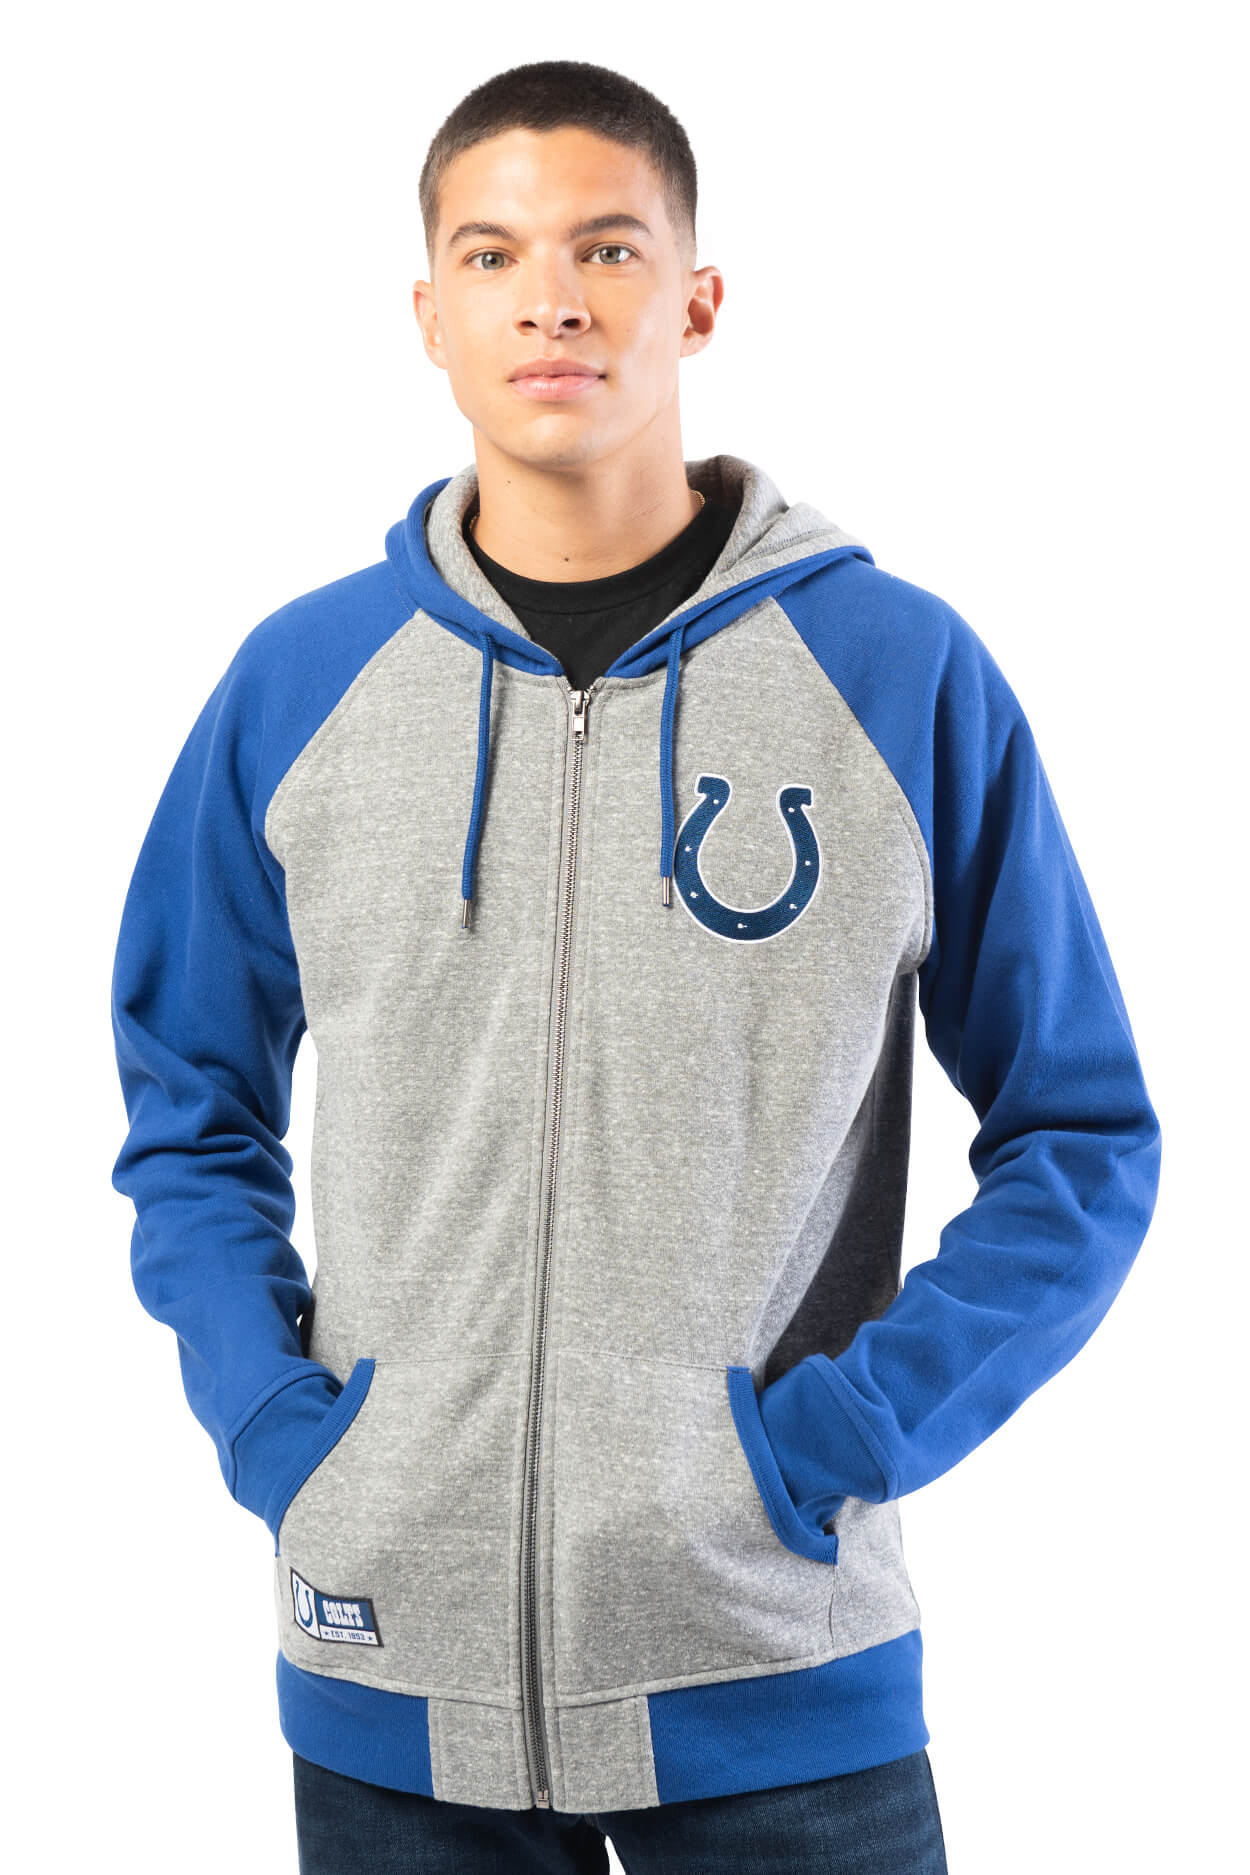 NFL Indianapolis Colts Men's Full Zip Hoodie|Indianapolis Colts